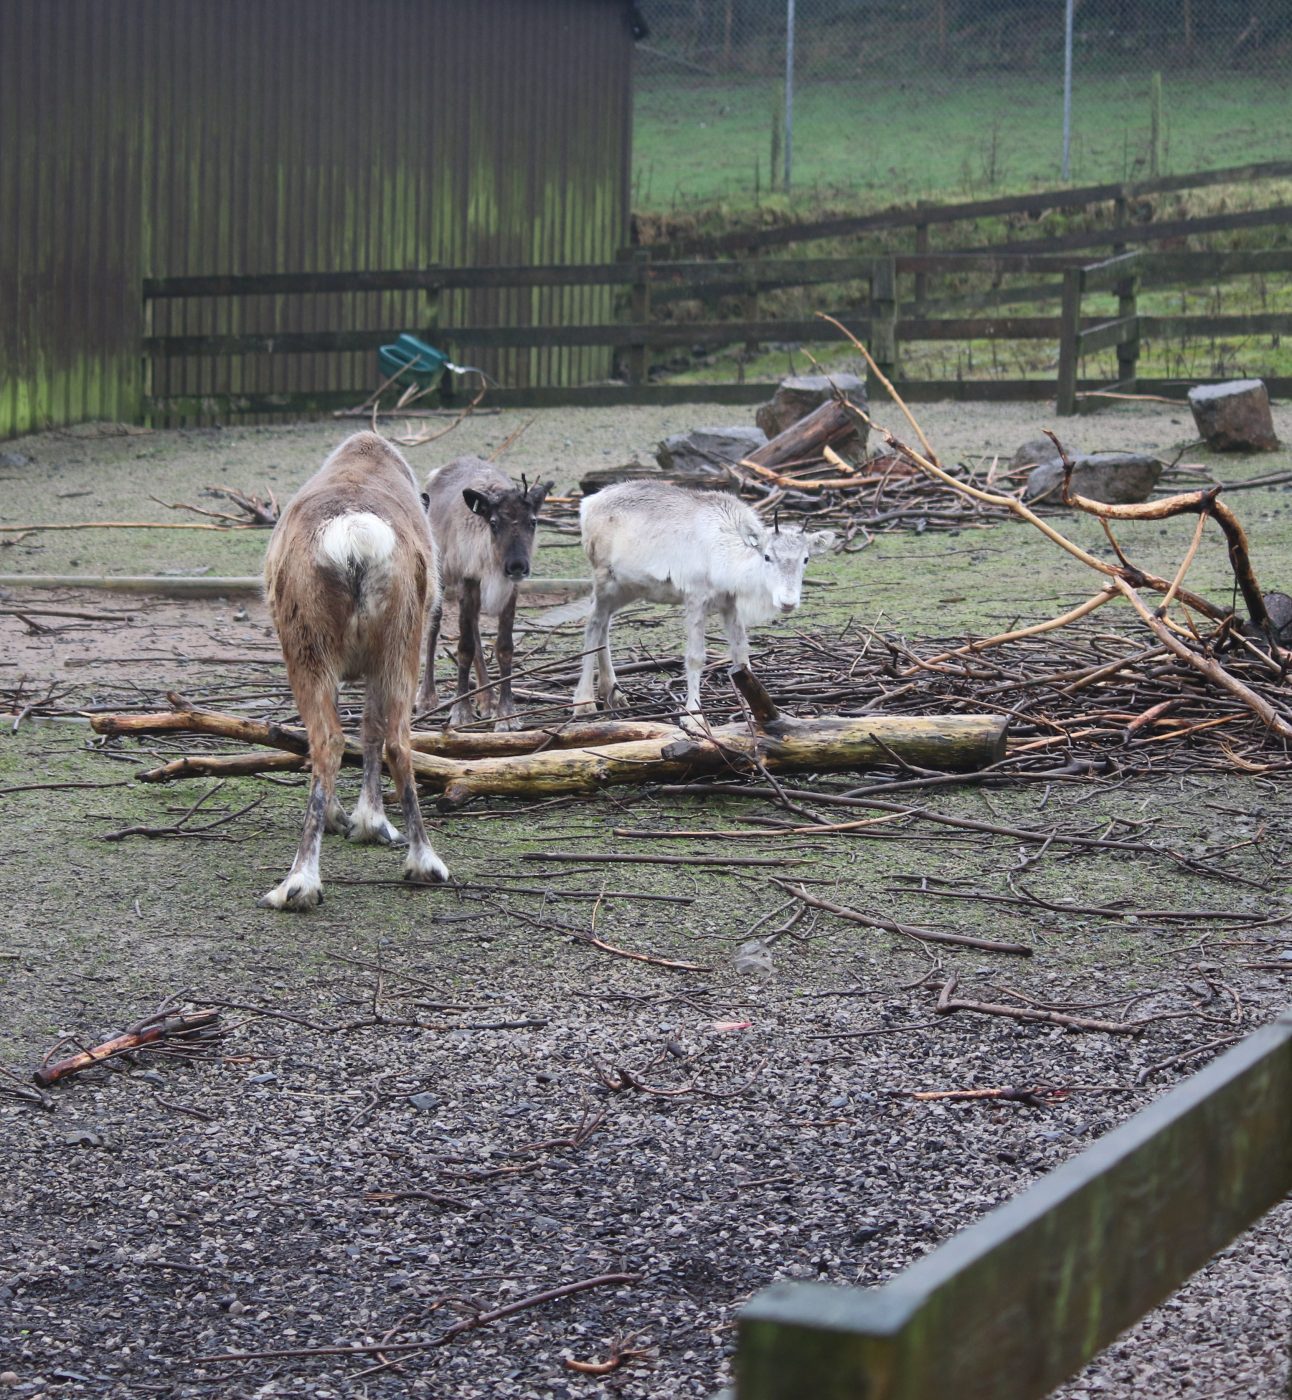 A group of reindeer standing in a grim and barren enclosure at South Lakes Safari Zoo in Cumbria